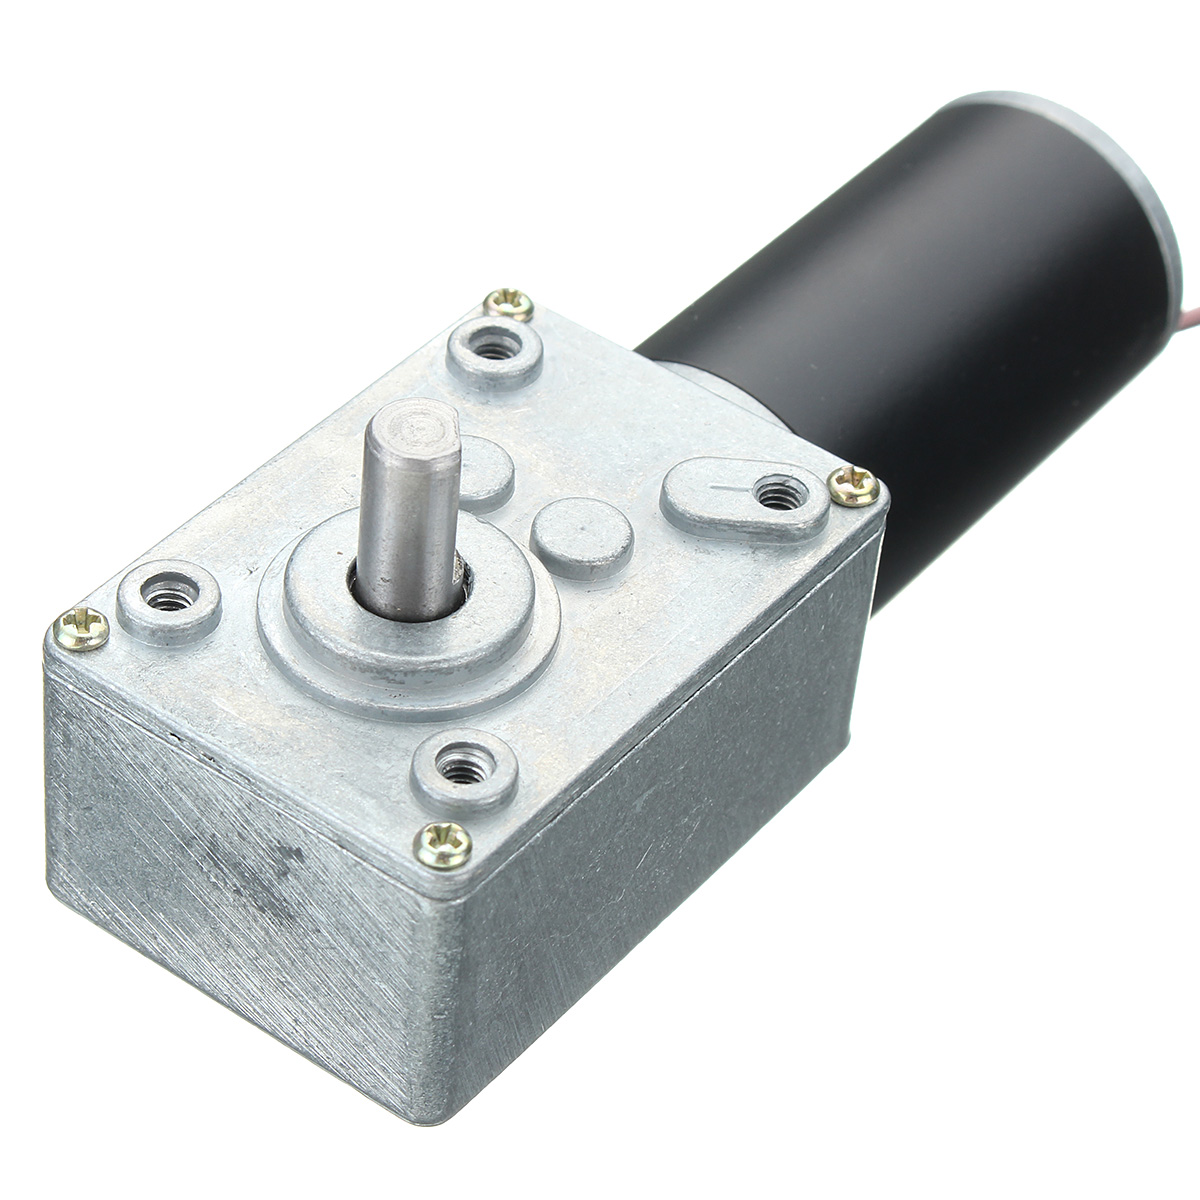 12V-DC-Motor-High-Torque-Electric-Power-Turbo-Reversible-Reducer-Worm-Geared-1193711-3